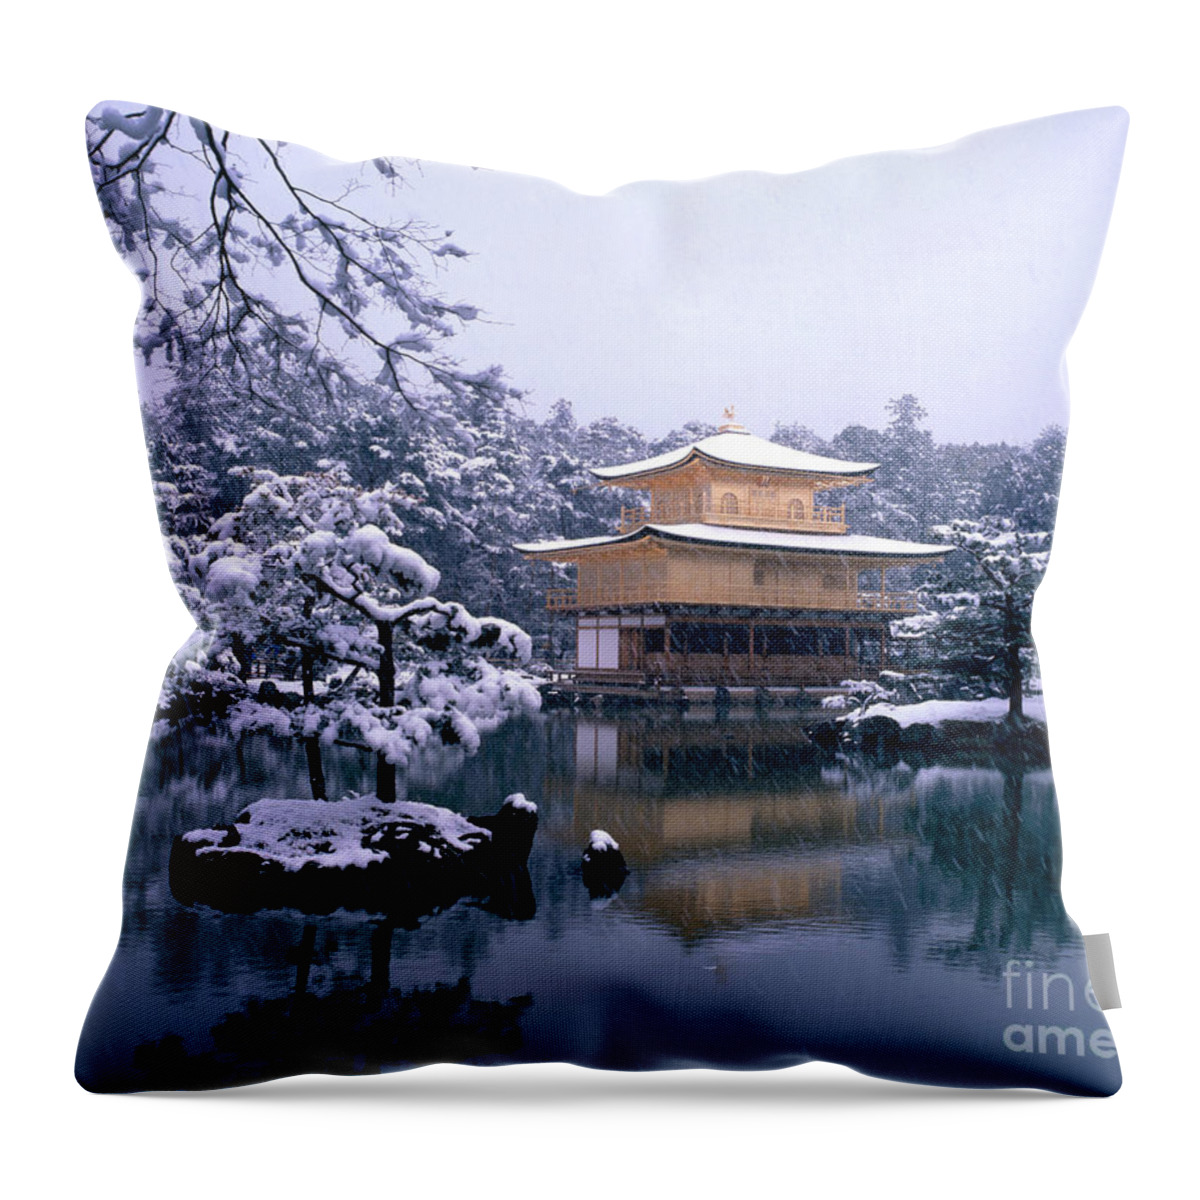 Travel Throw Pillow featuring the photograph Gold Temple In Kyoto, Japan by Masao Hayashi